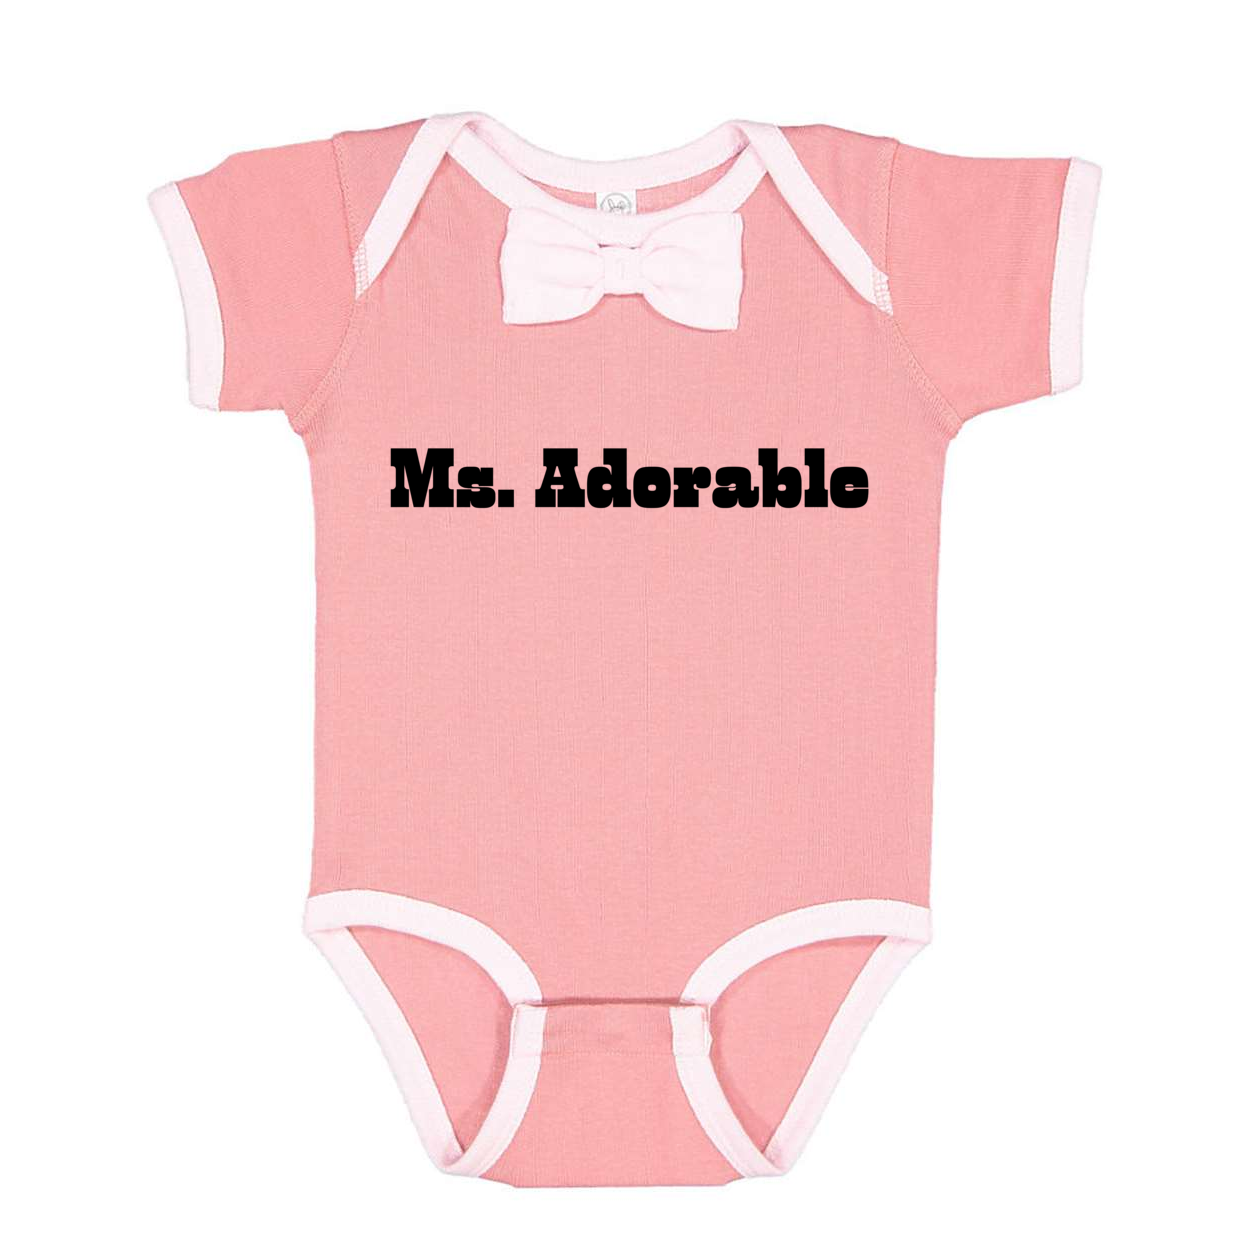 MAUVELOUS/ BALLERINA - Ms. Adorable Baby Rib Bow Tie Bodysuit - Ships from The US - infant onesie at TFC&H Co.